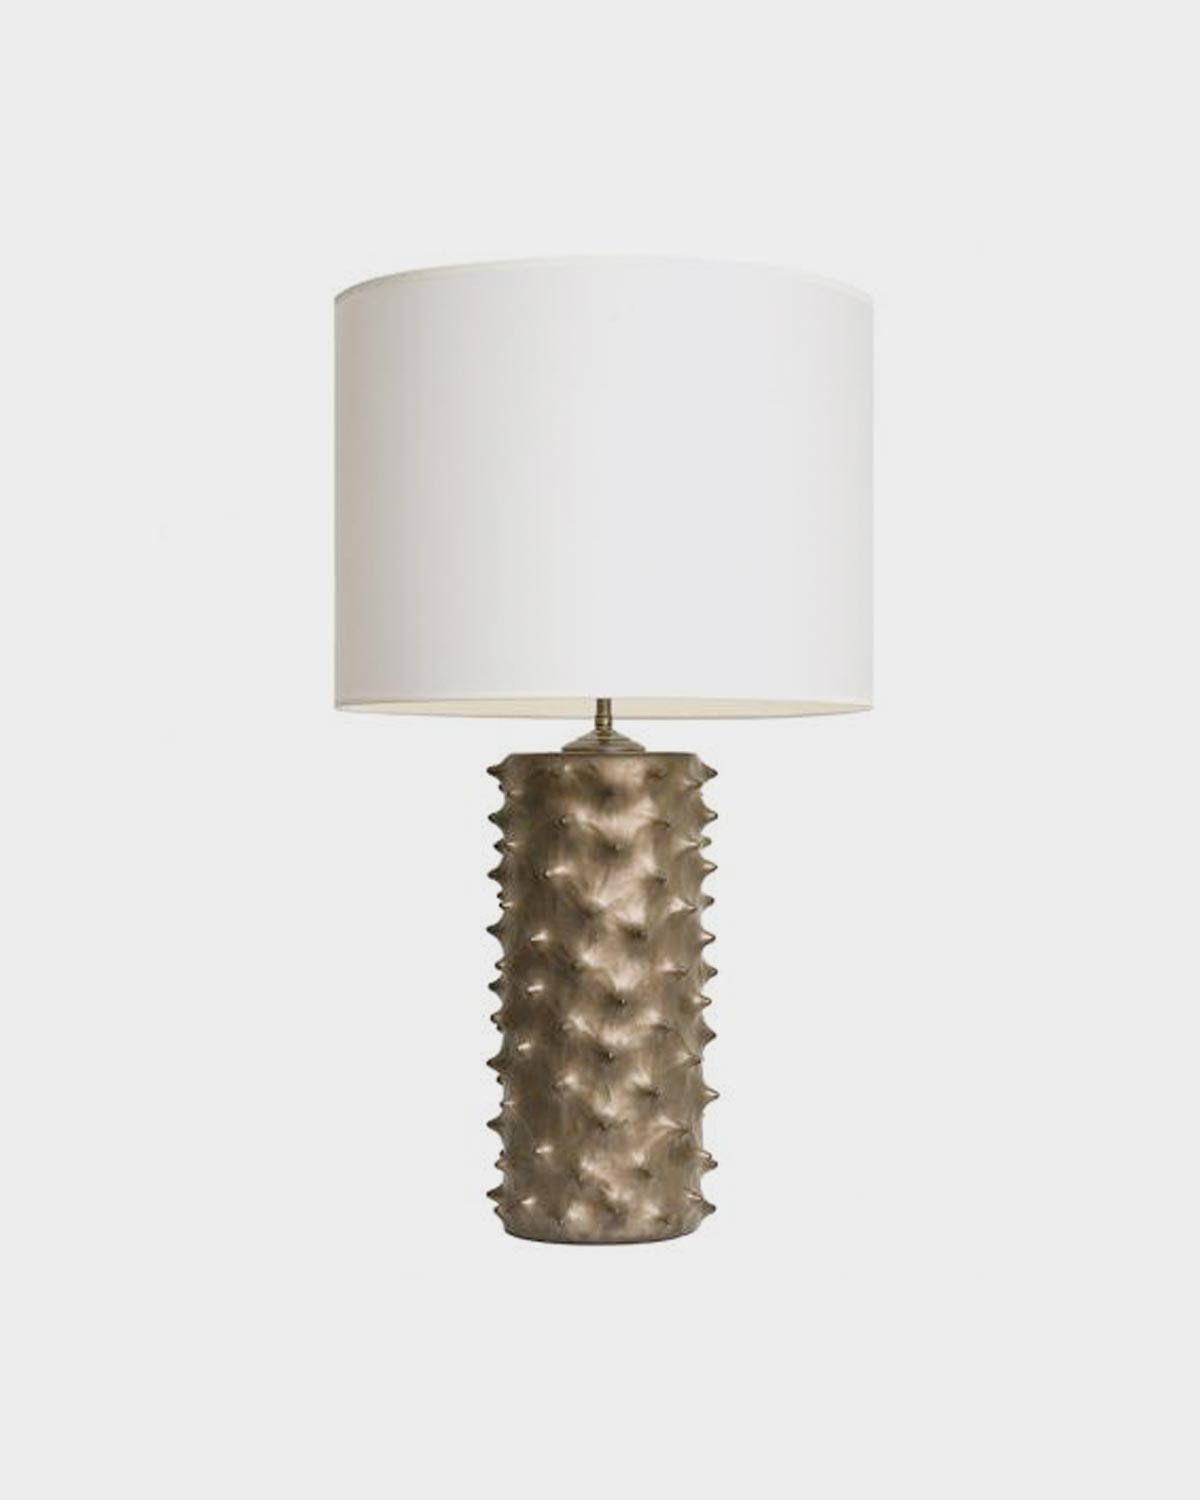 The Spina Table Lamp by Pamela Sunday